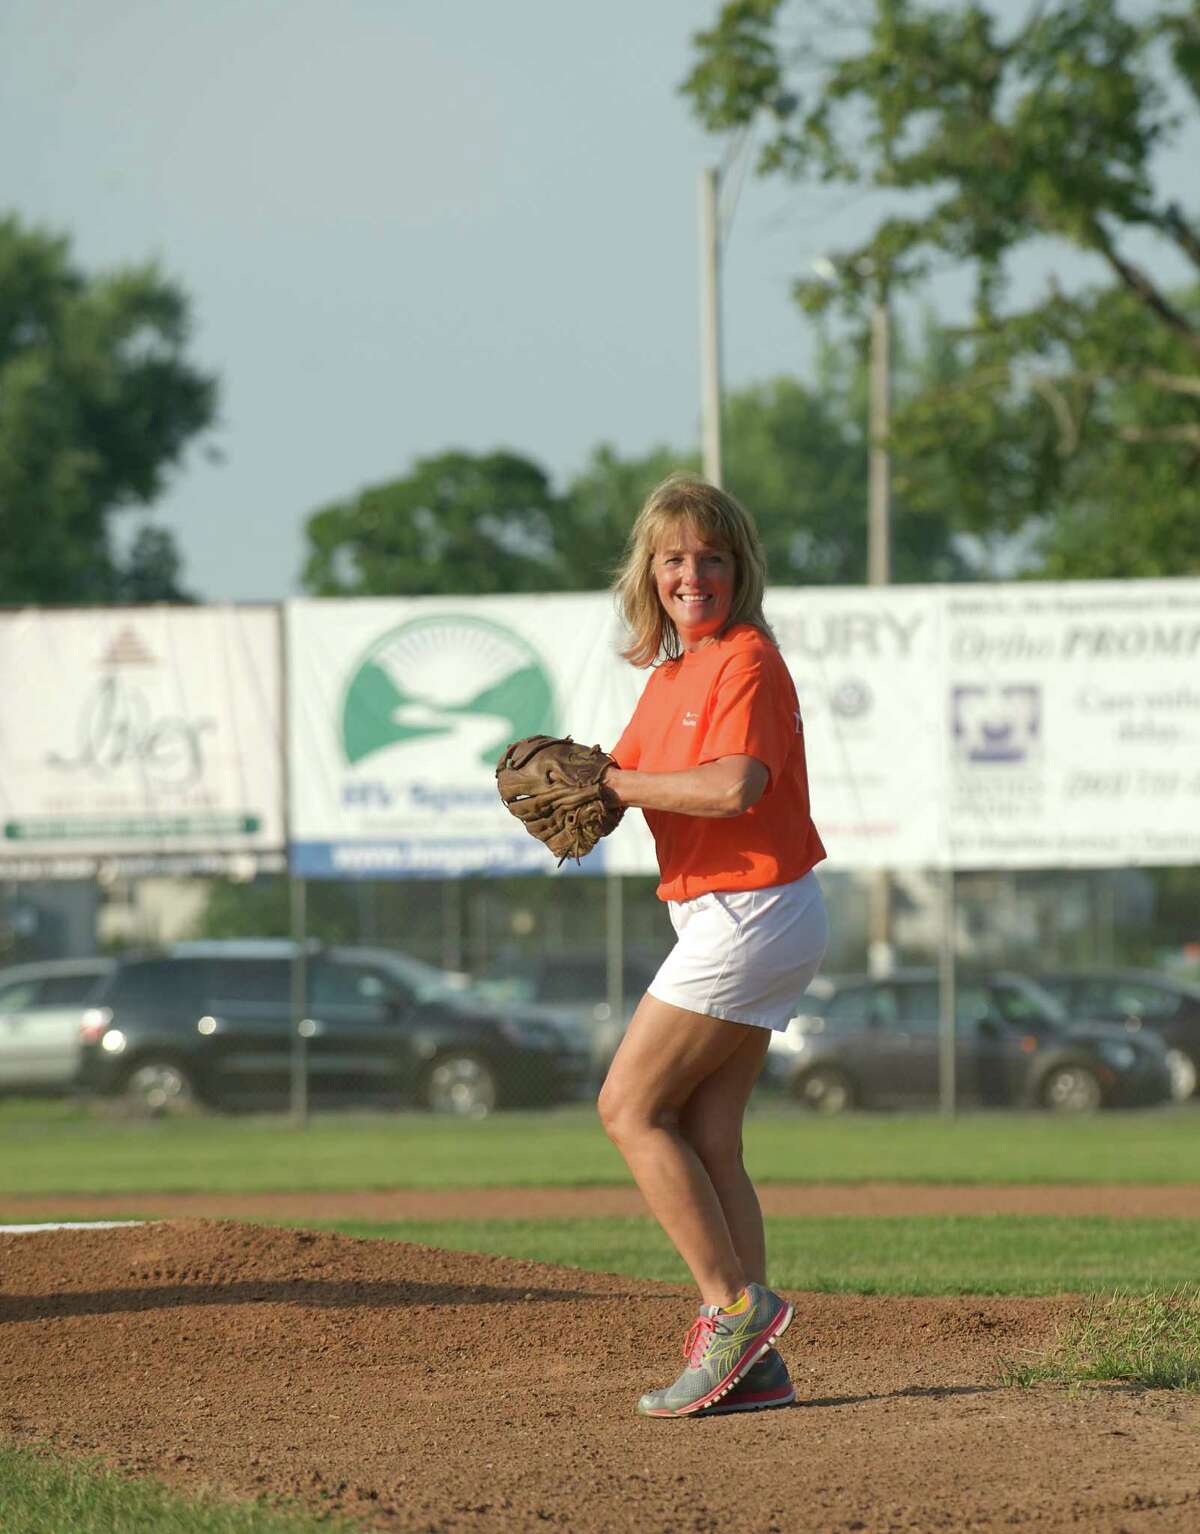 Throwing the the first pitch of the Danbury Westerners ball game is Nancy Symanowitz, RN. The Westerners were honoring the Carolyn M. Deering, RN, Memorial Nursing Education Fund and all registered nurses from Danbury Hospital at Rogers Park, in Danbury Conn on July 18, 2013.